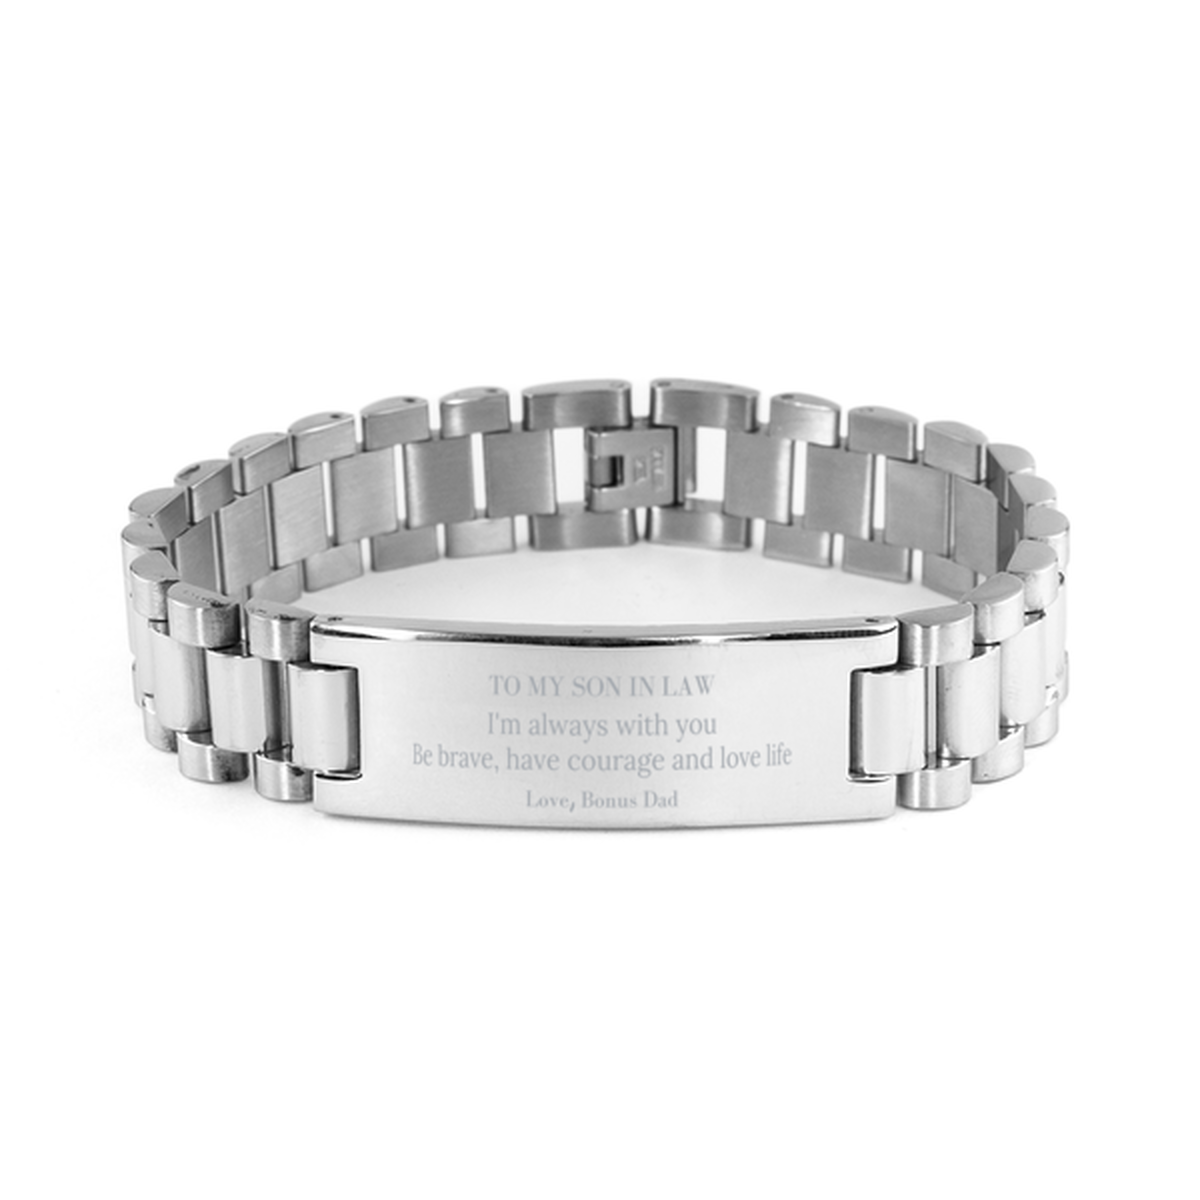 To My Son In Law Gifts from Bonus Dad, Unique Ladder Stainless Steel Bracelet Inspirational Christmas Birthday Graduation Gifts for Son In Law I'm always with you. Be brave, have courage and love life. Love, Bonus Dad